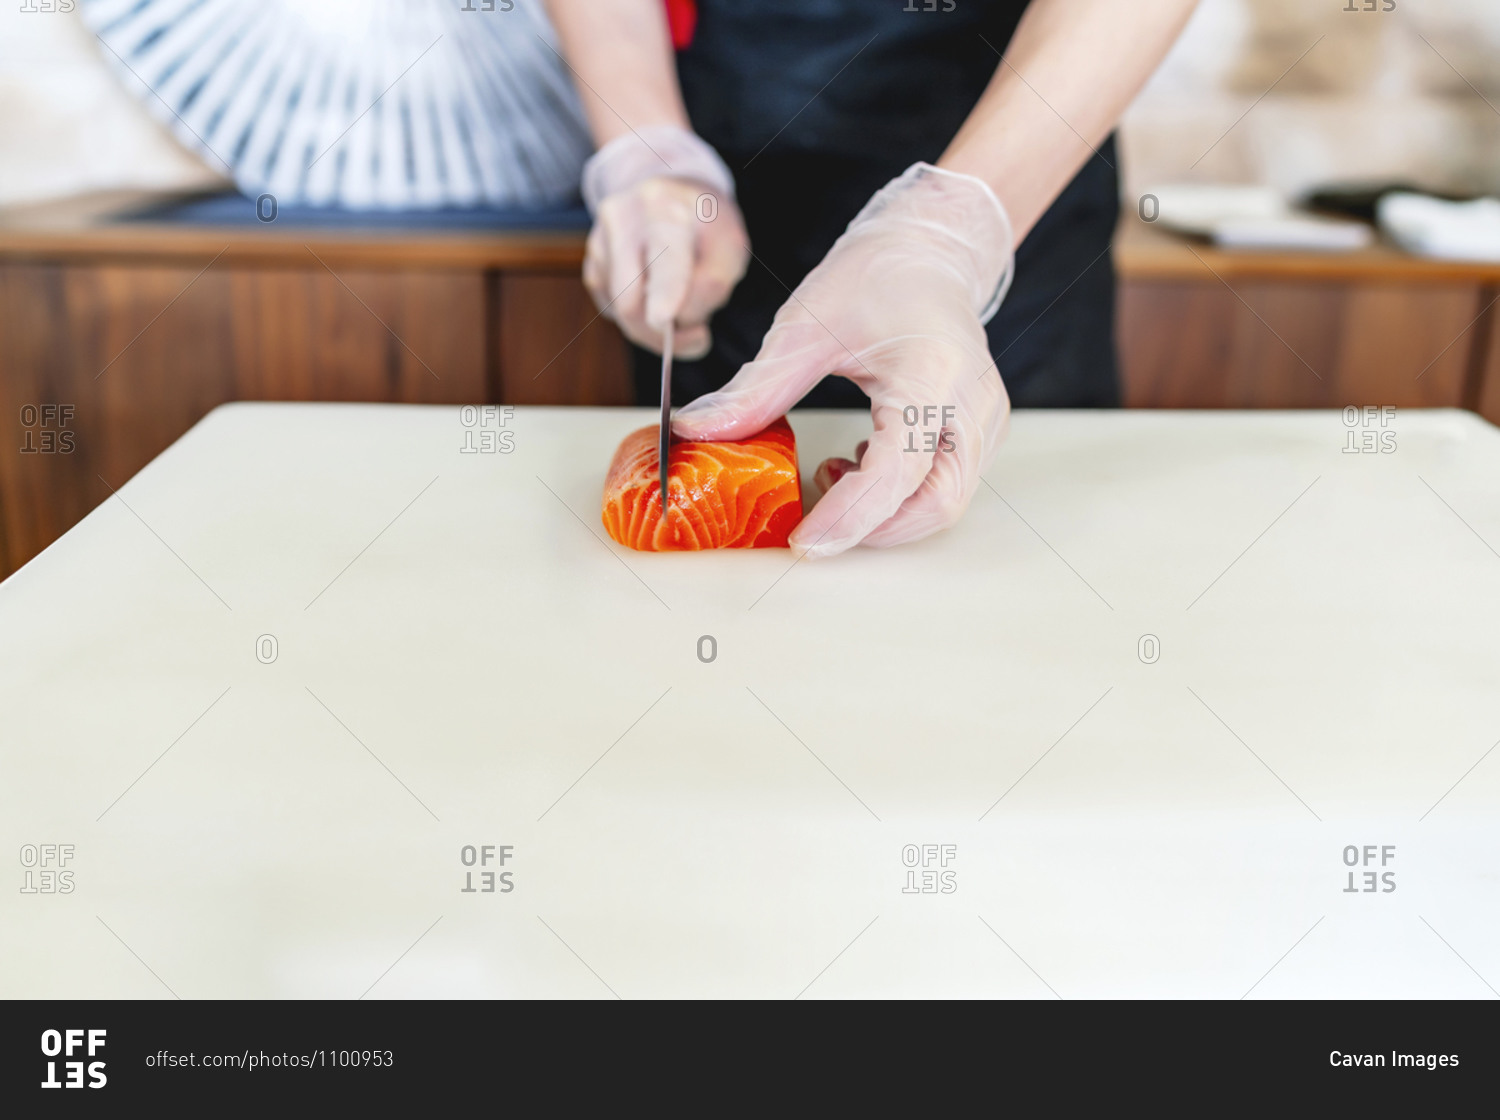 Japanese chef expert in sushi with his knife cutting salmon